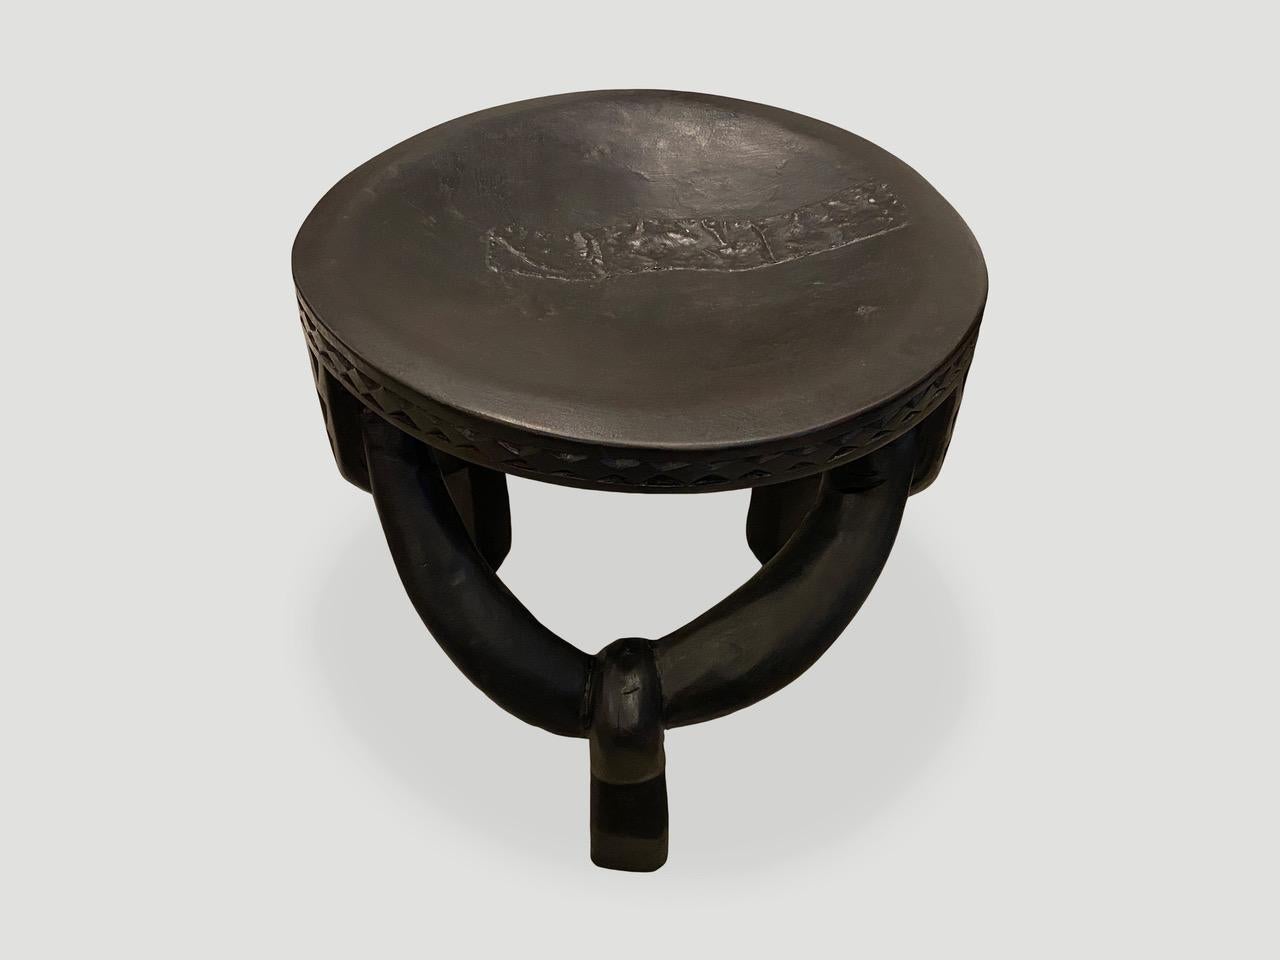 Tribal Andrianna Shamaris Tanzanian Antique Sculptural Side Table or Stool